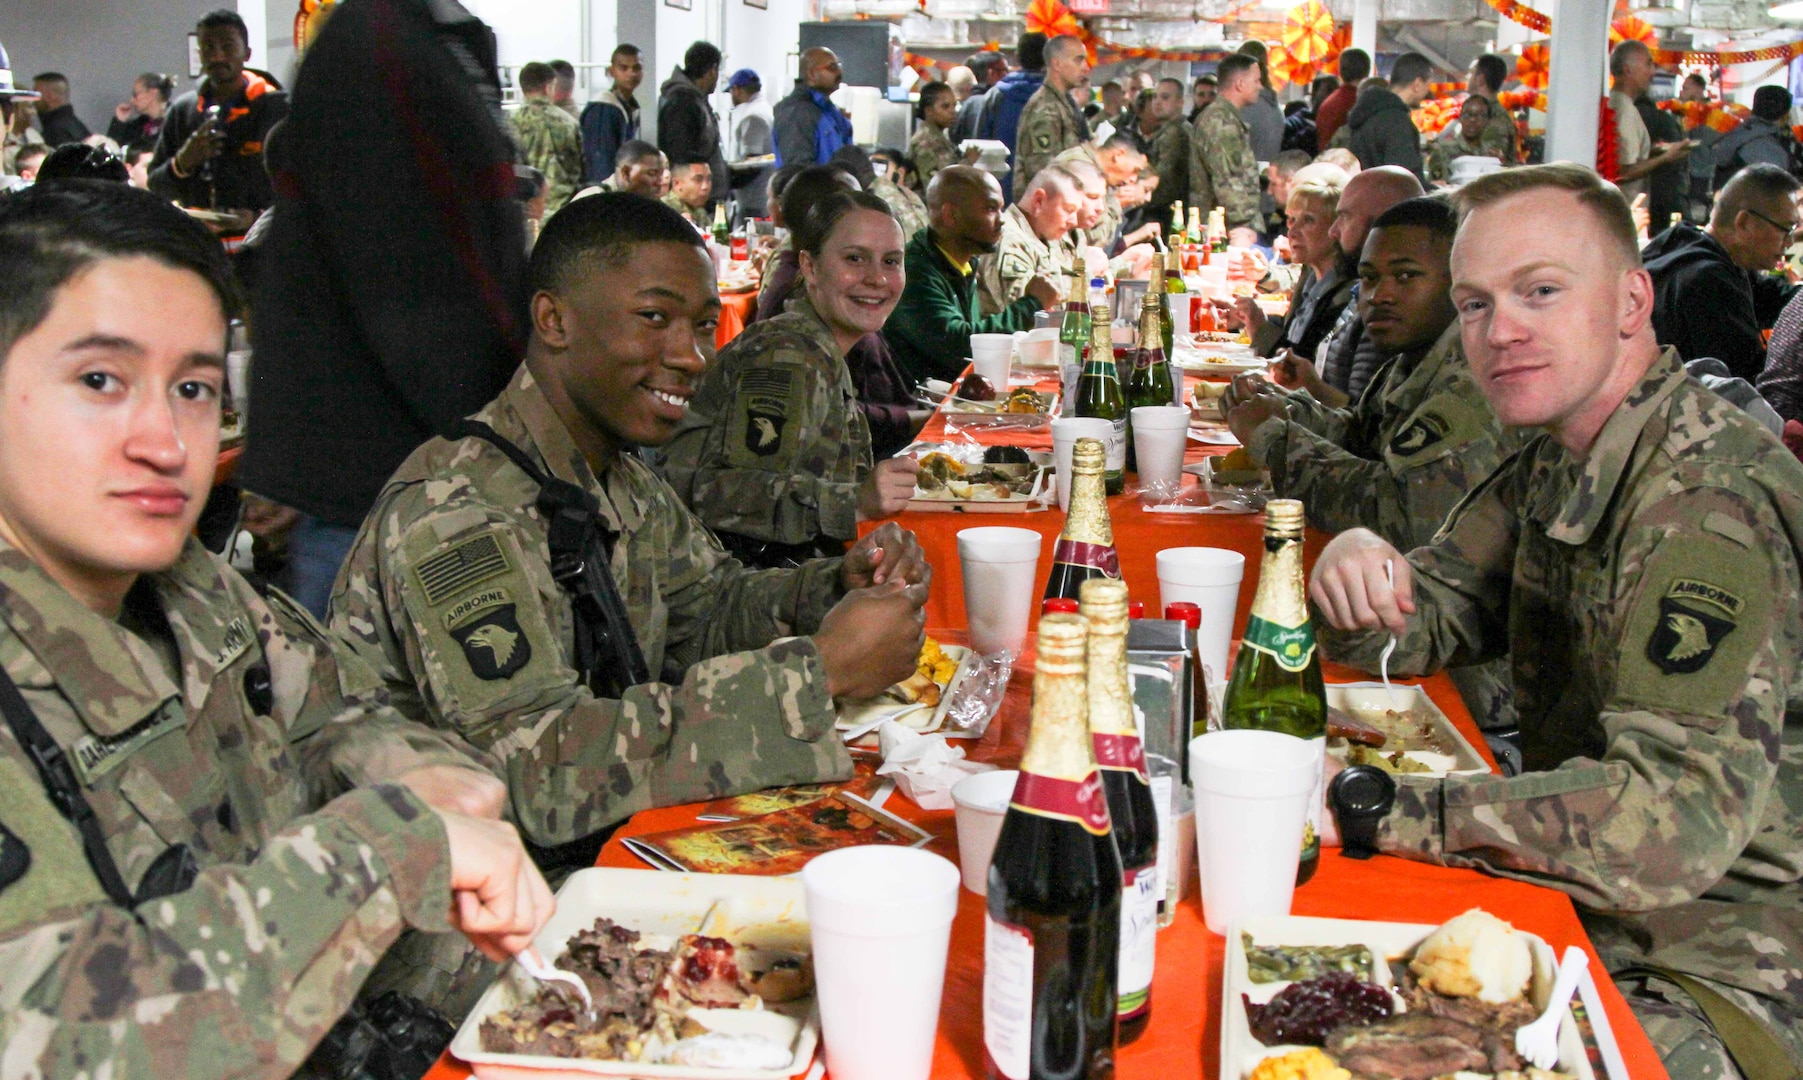 A group of soldiers celebrate Thanksgiving dinner in a photo from 2018.